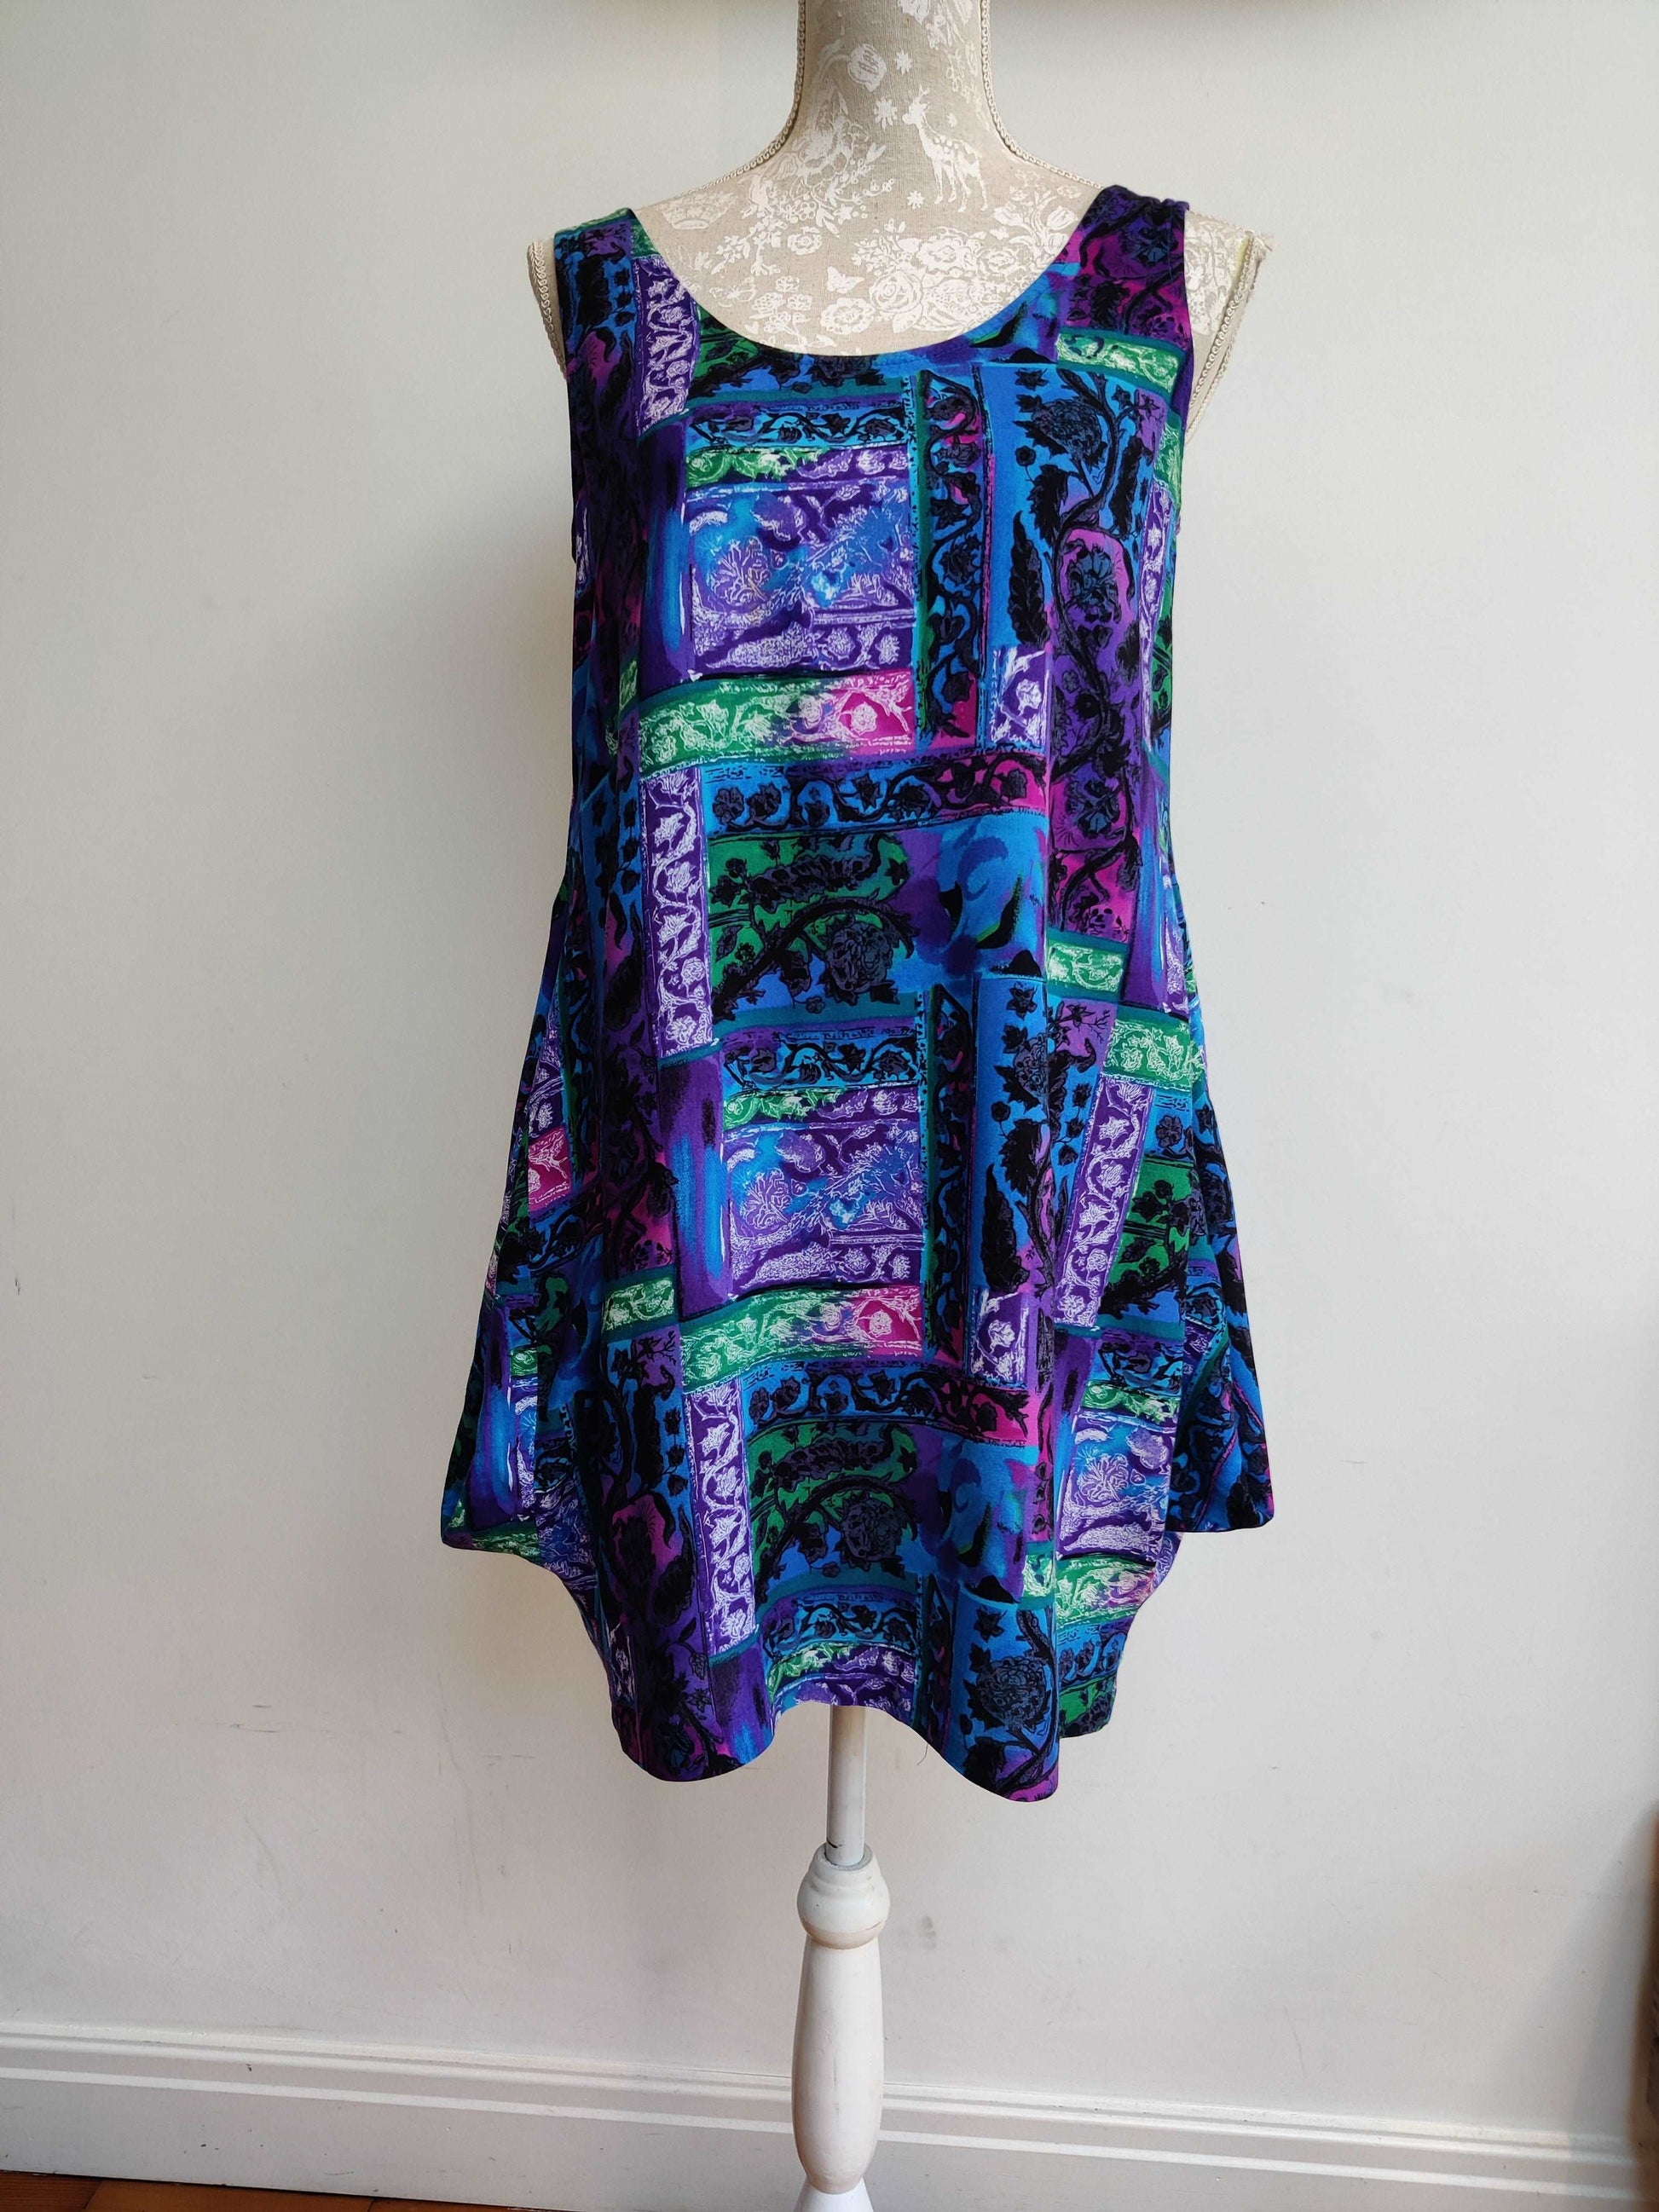 80s print vintage top. perfect for festivals.